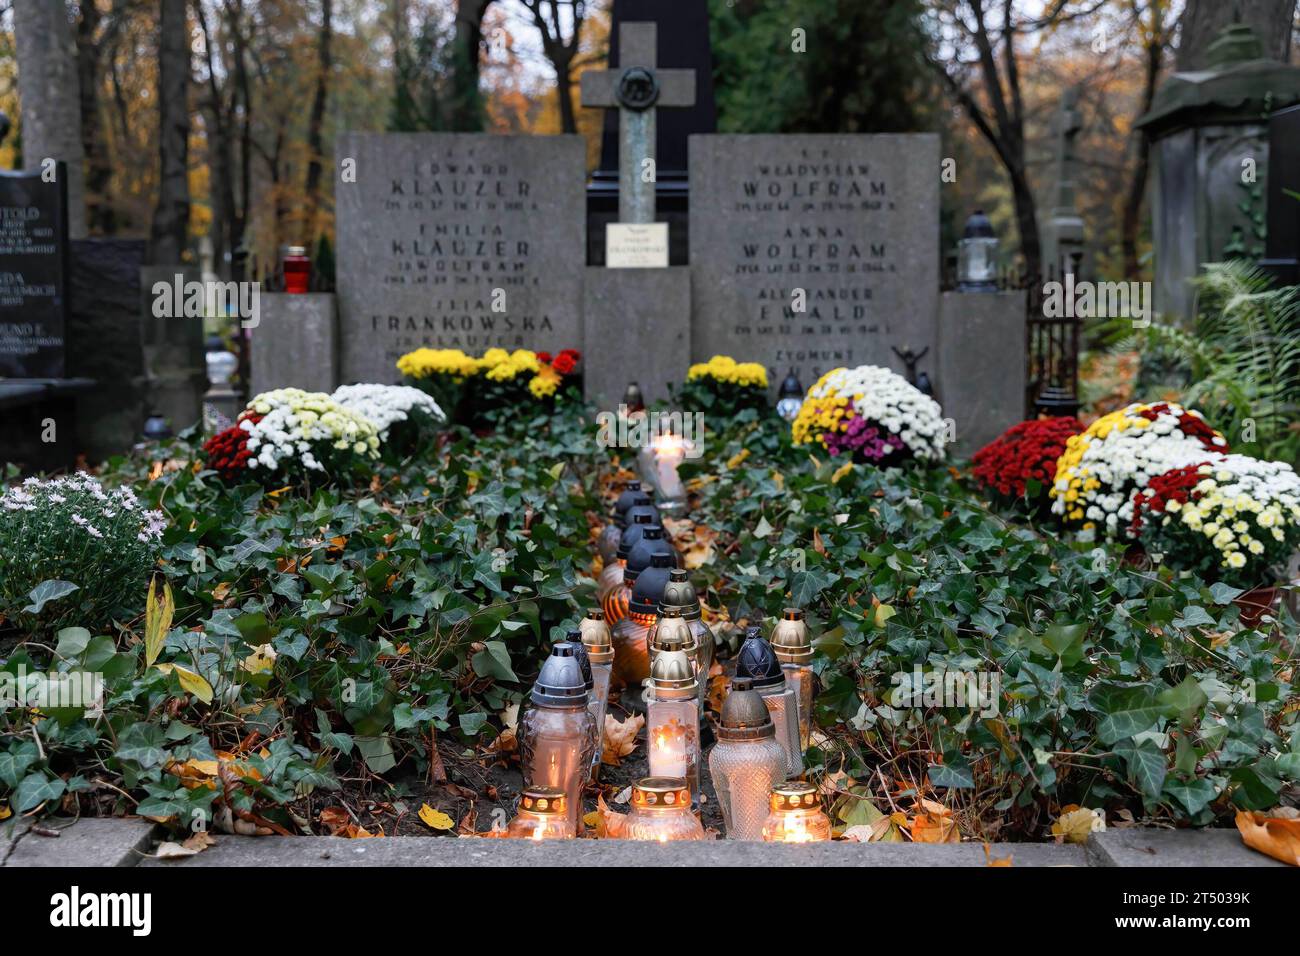 Flowers and lit candles stand on the grave on All Saints' Day at the Evangelical-Augsburg Cemetery in Warsaw. All Saints' Day (or Dzie? Zaduszny in Polish) is a public holiday in Poland. It is an opportunity to remember deceased relatives. On this day, people bring flowers, typically chrysanthemums, and candles to cemeteries. The entire cemetery is filled with lights in the darkness. The Evangelical-Augsburg Cemetery is a historic Lutheran Protestant cemetery located in the western part of Warsaw. Since its opening in 1792, more than 100,000 people have been buried there. (Photo by Volha Shuka Stock Photo